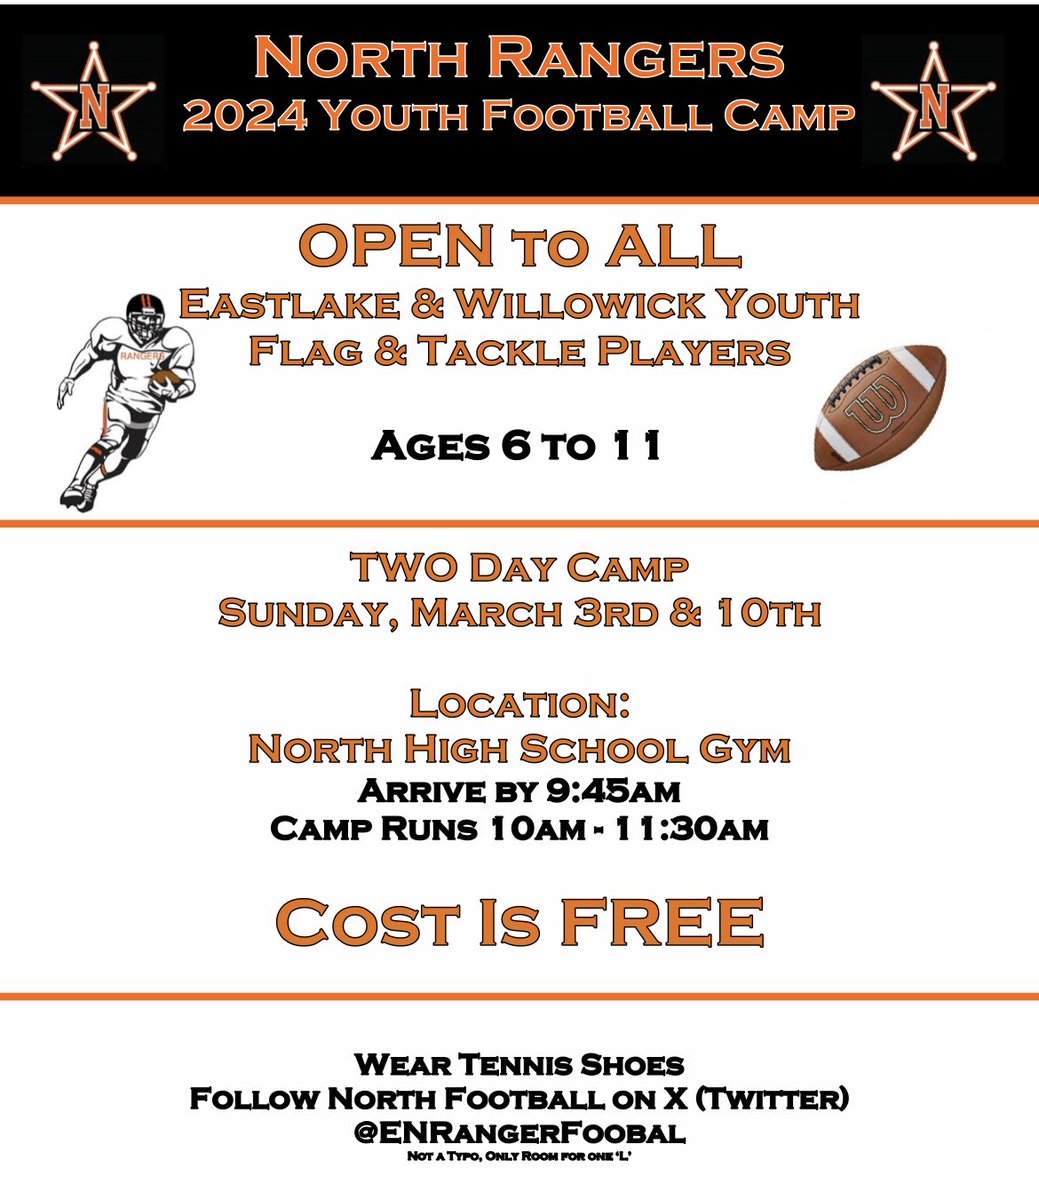 Future Rangers YOUTH camp tomorrow. Dress for indoors AND outdoors. Tennis shoes and cleats. GO RANGERS! 💪🏻🏈